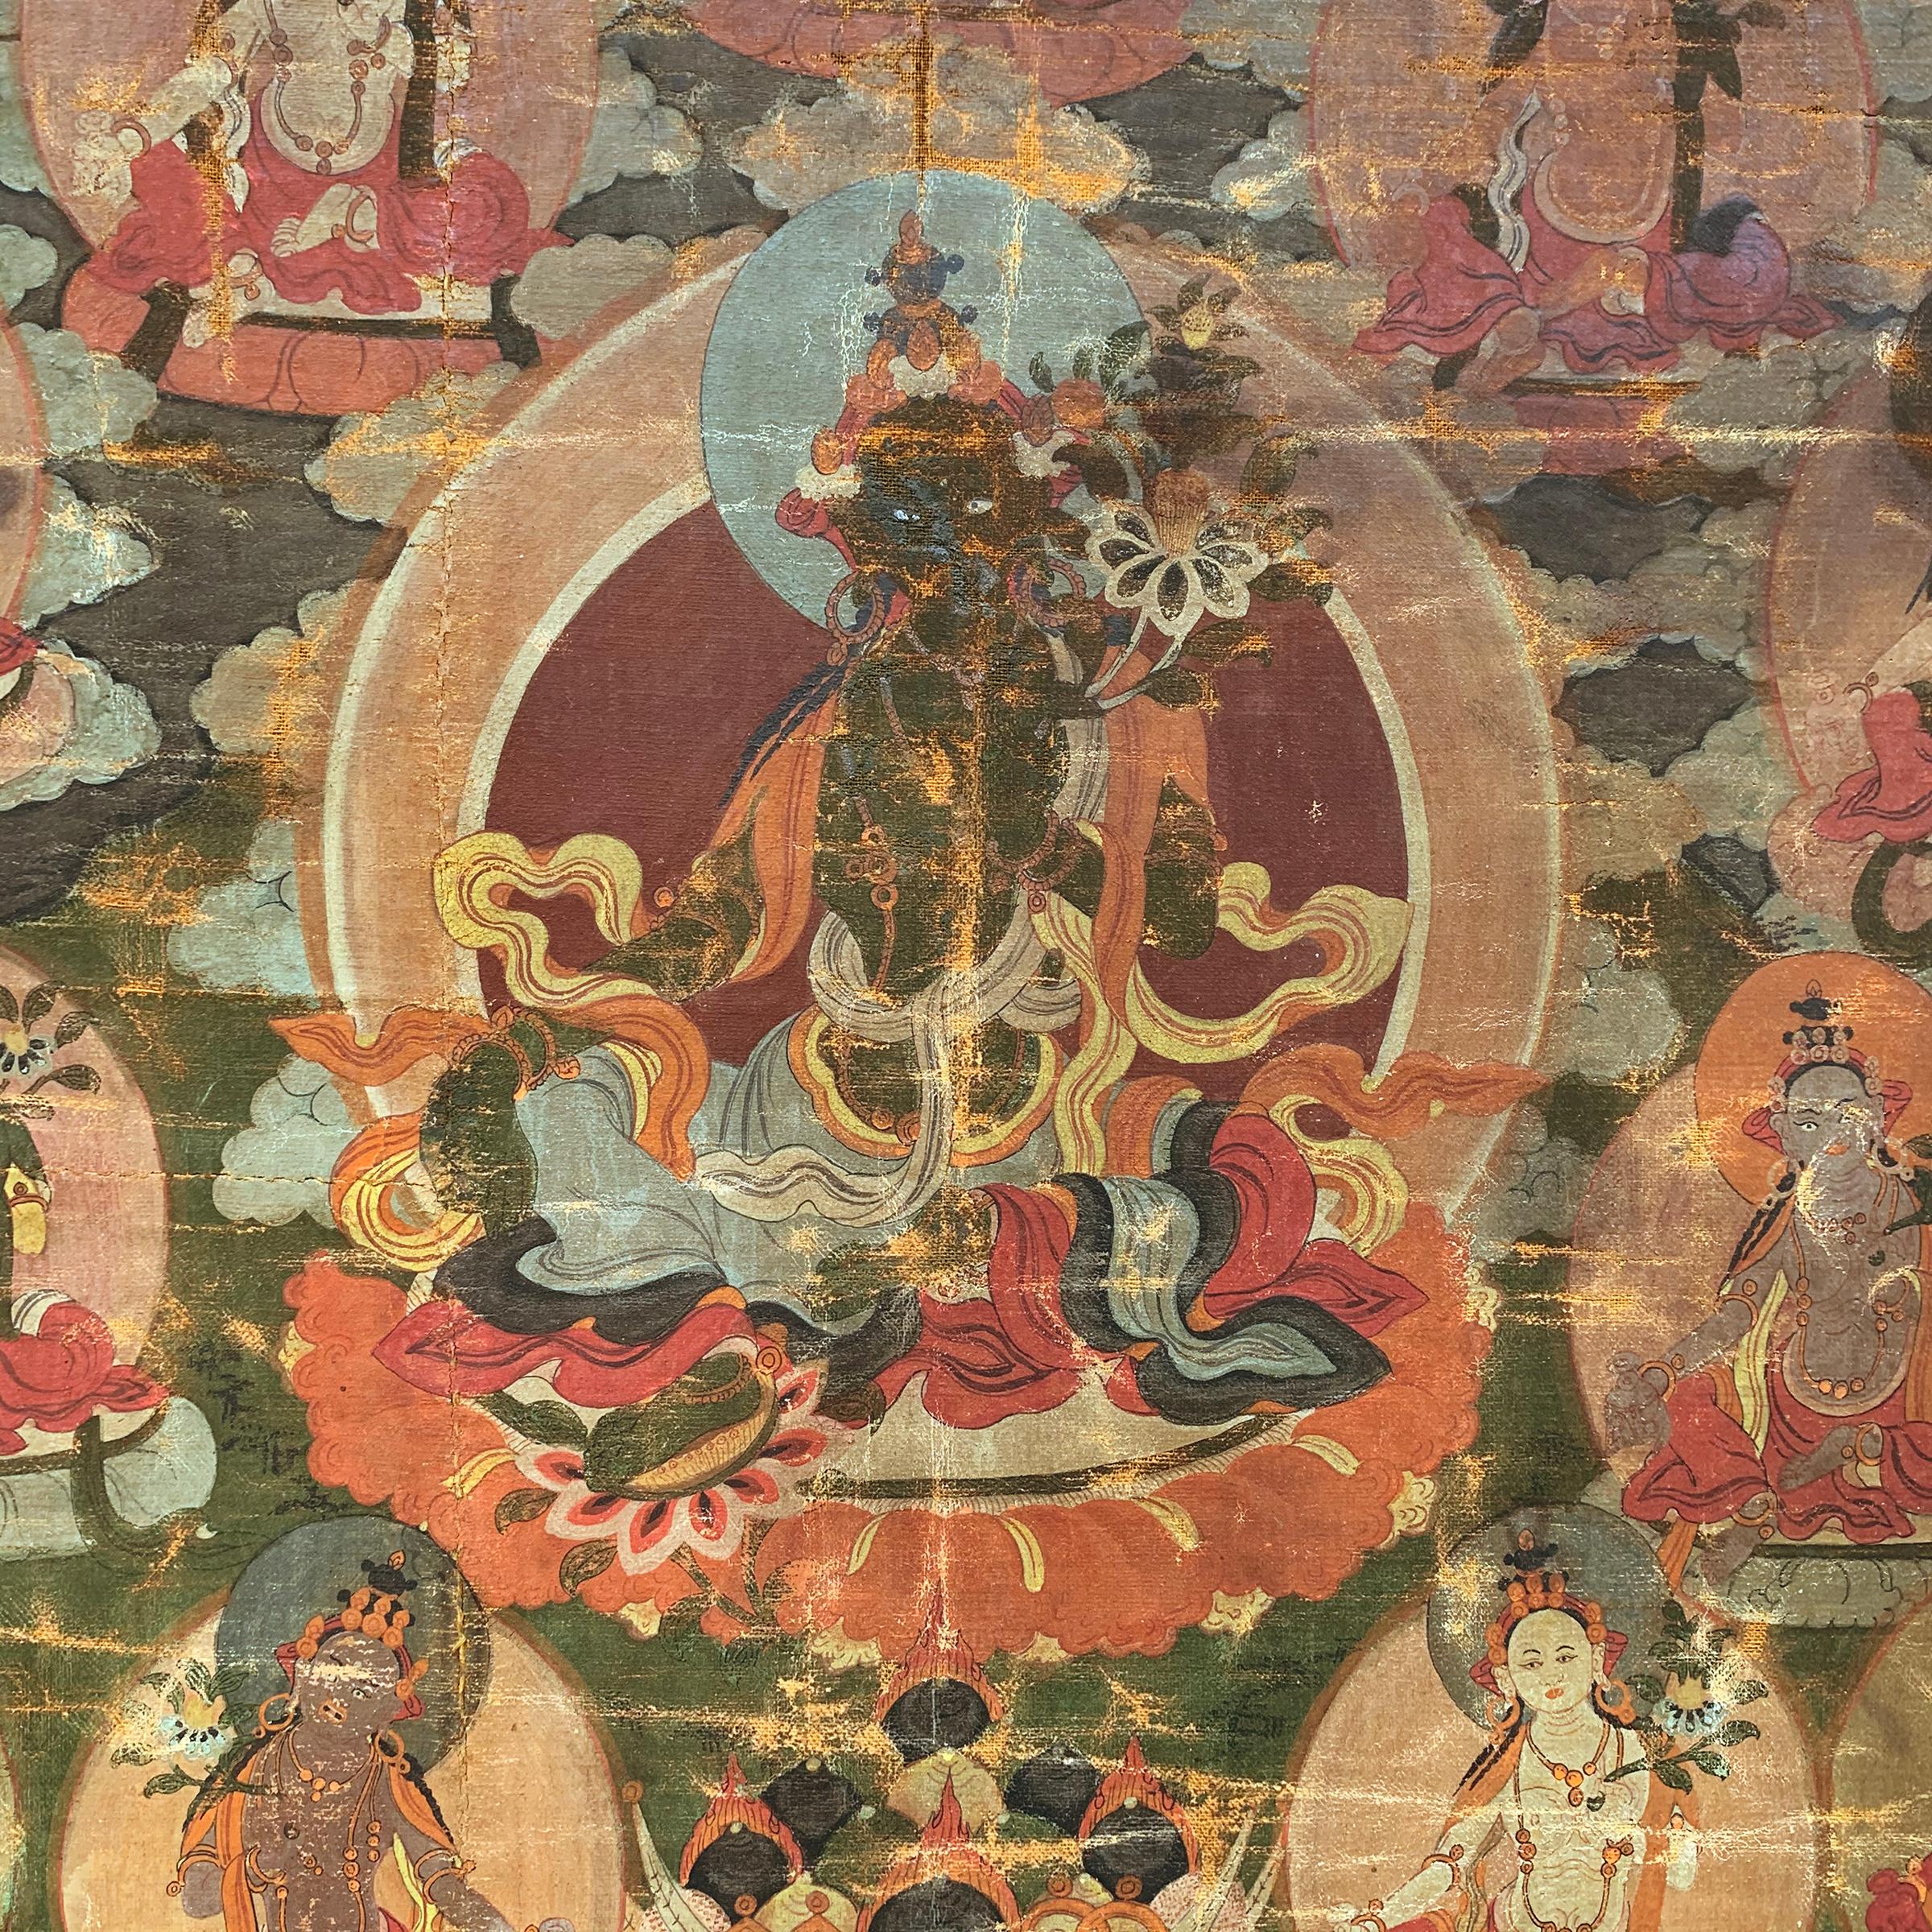 A rare striking 18th century Tibetan Thangka depicting the Green Tara seated on a lotus throne ready to step down to offer comfort and protection for all suffering beings. Her right hand is extended in the Giving gesture and her left hand in the